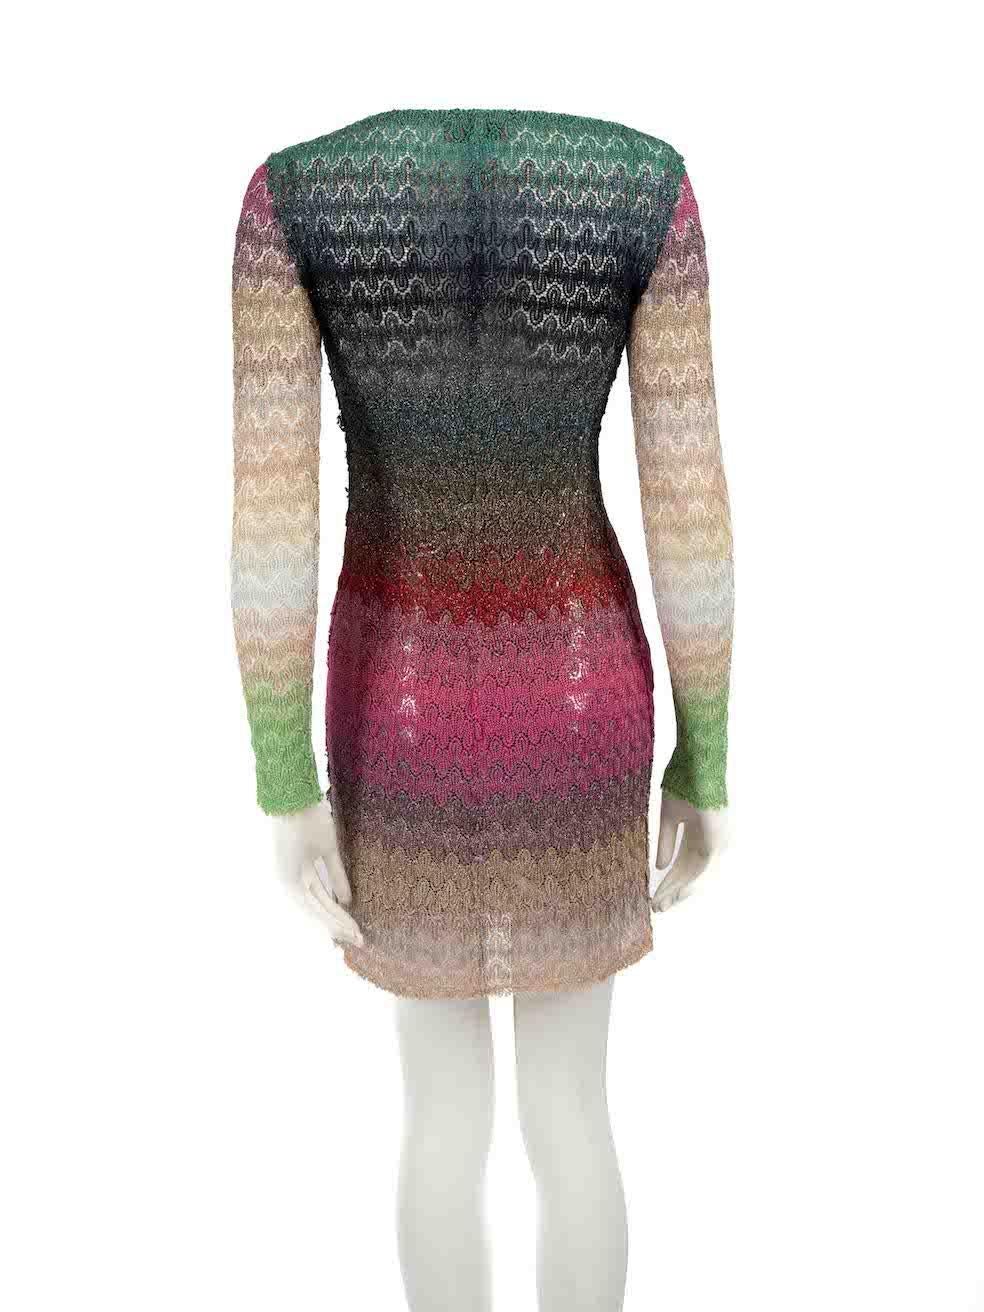 Missoni Ombré Glitter Knit Dress Size XS In Good Condition For Sale In London, GB